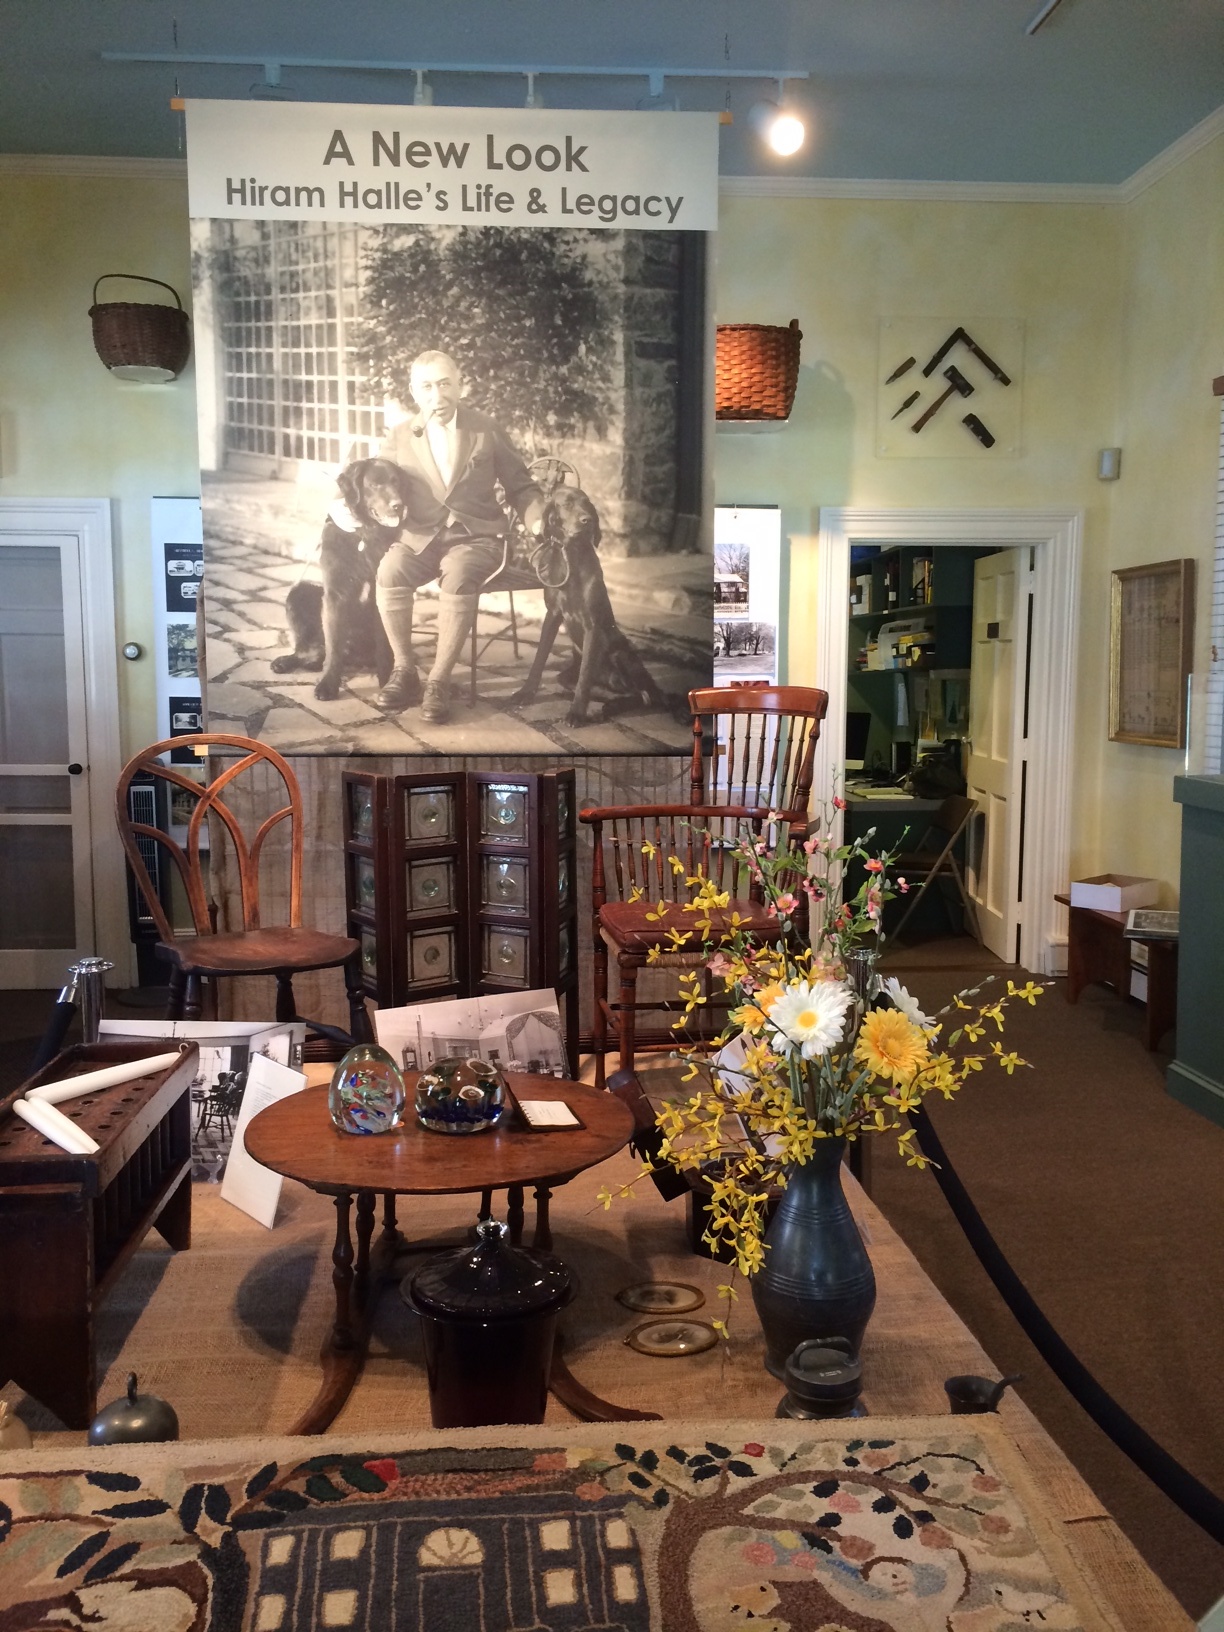 What Is a Hiram Halle House?  “A New Look: Hiram Halle’s Life & Legacy” – Pound Ridge, NY